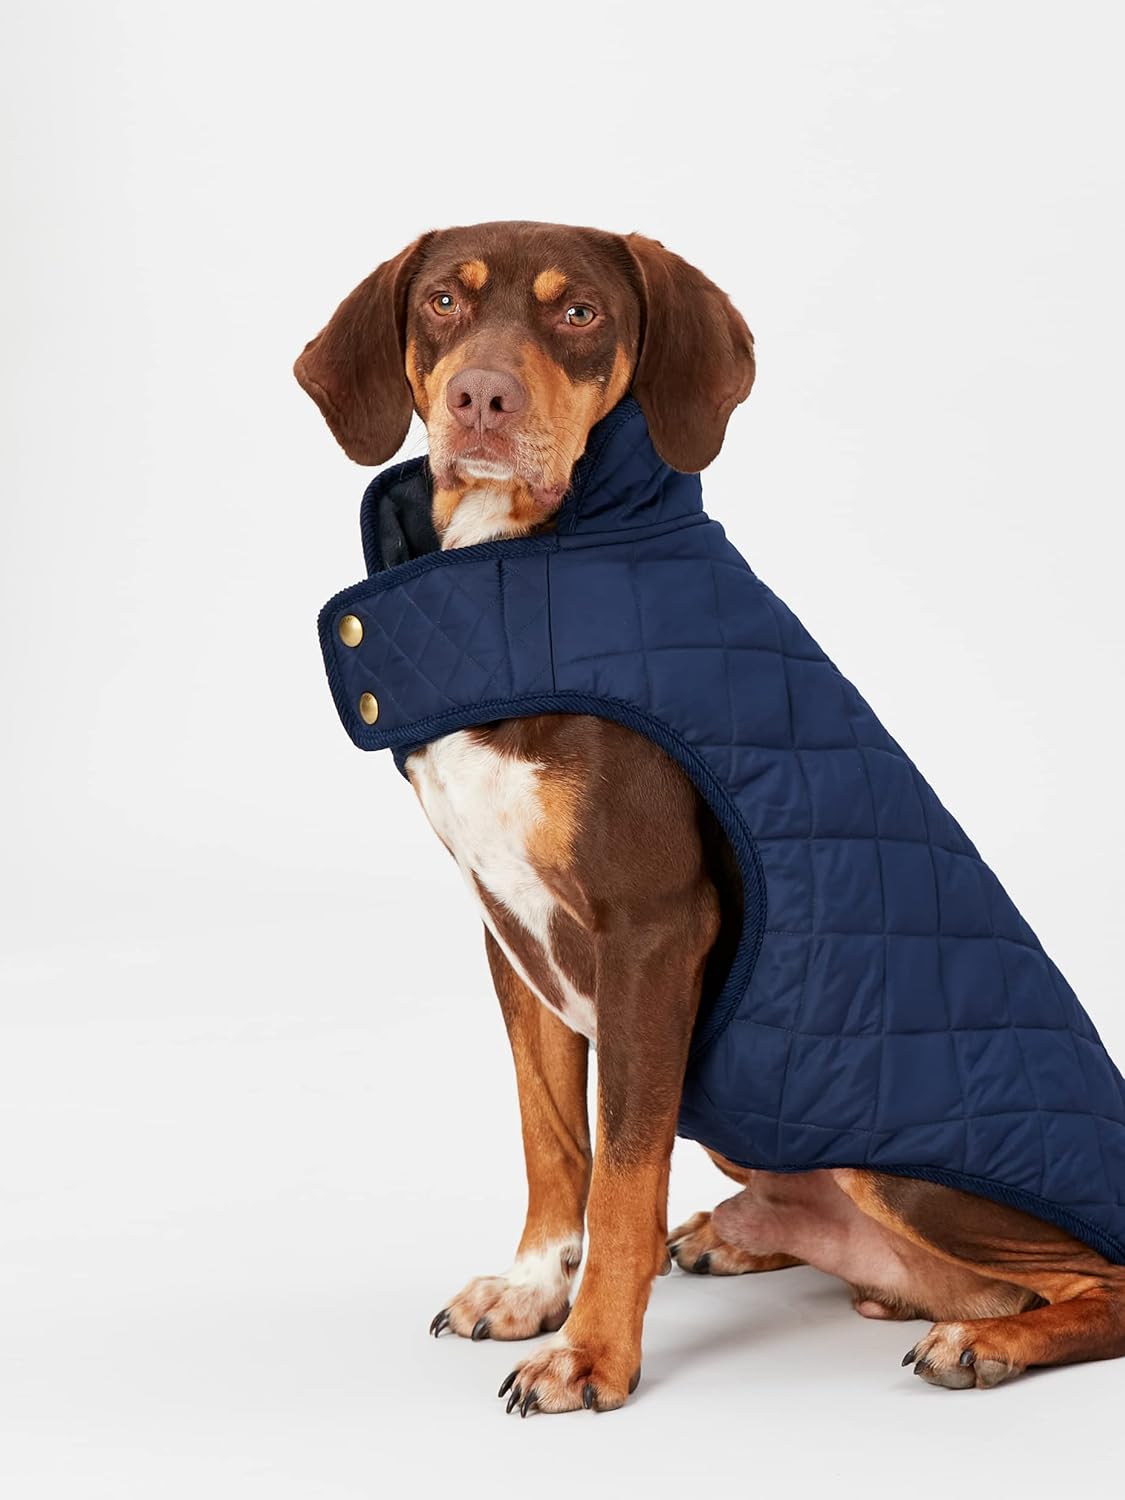 Joules Navy Blue Quilted Dog Coat